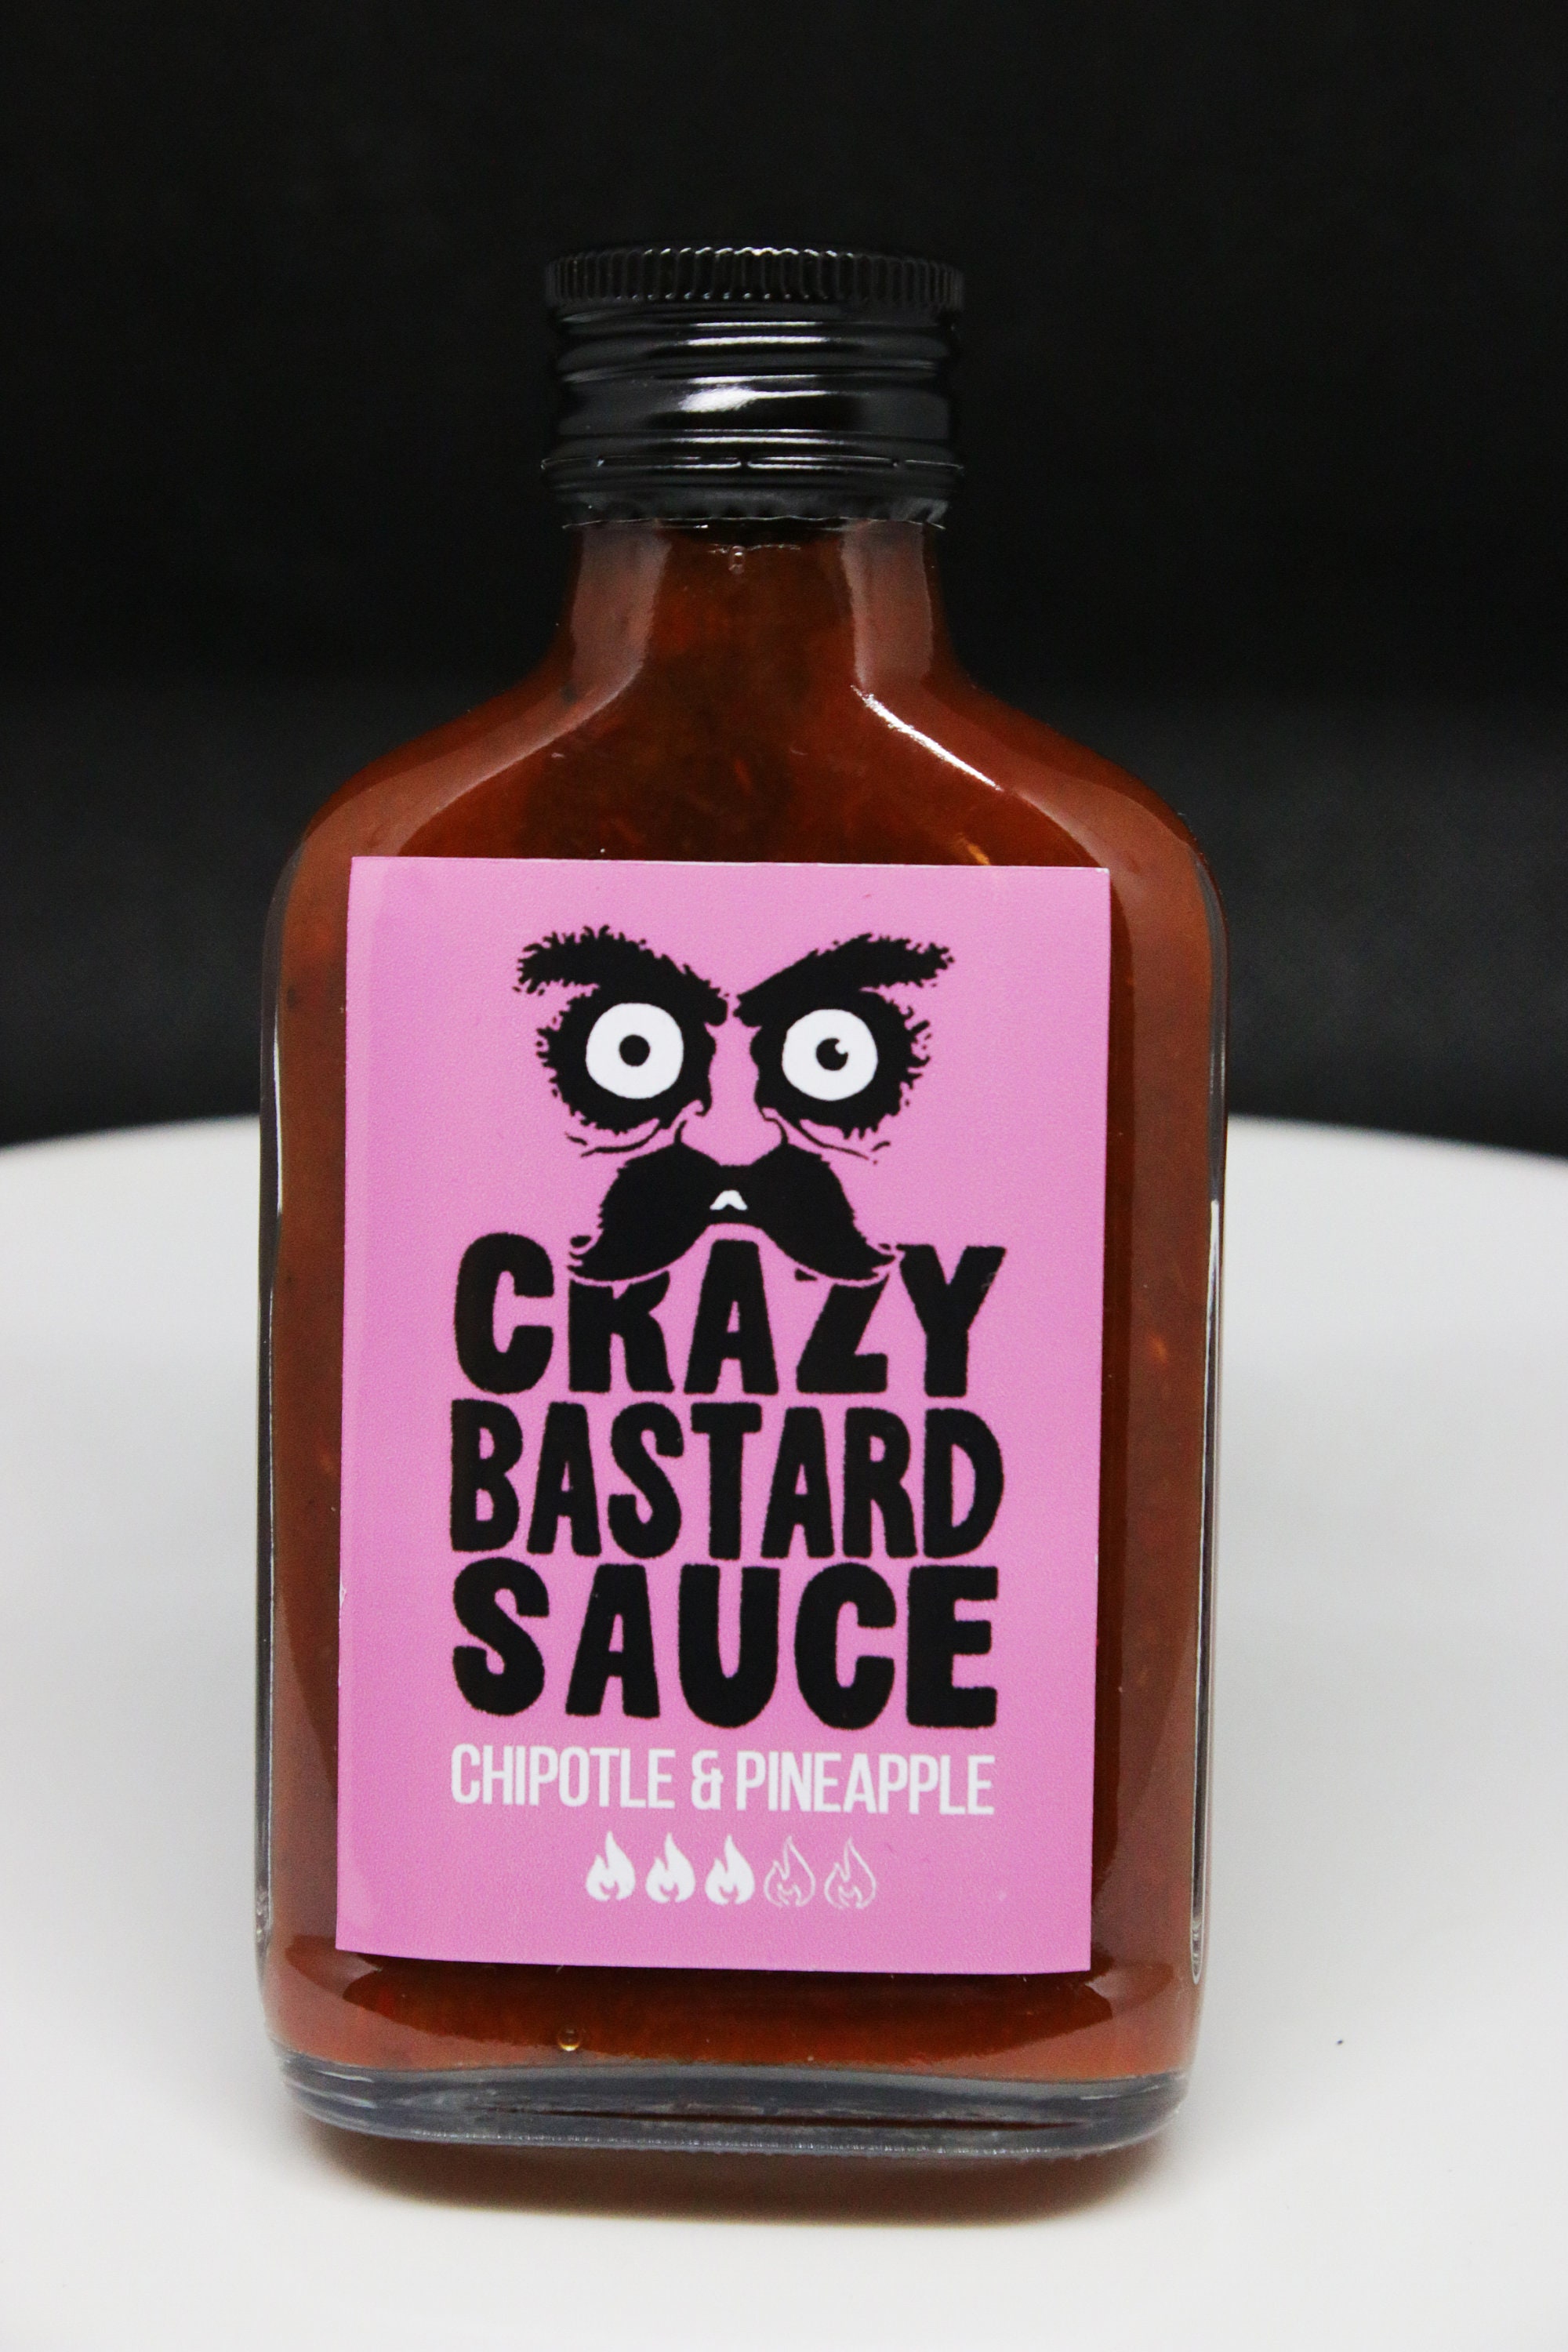 Crazy Bastard Sauce Chipotle & Pineapple - Lotts & Co. Grocery